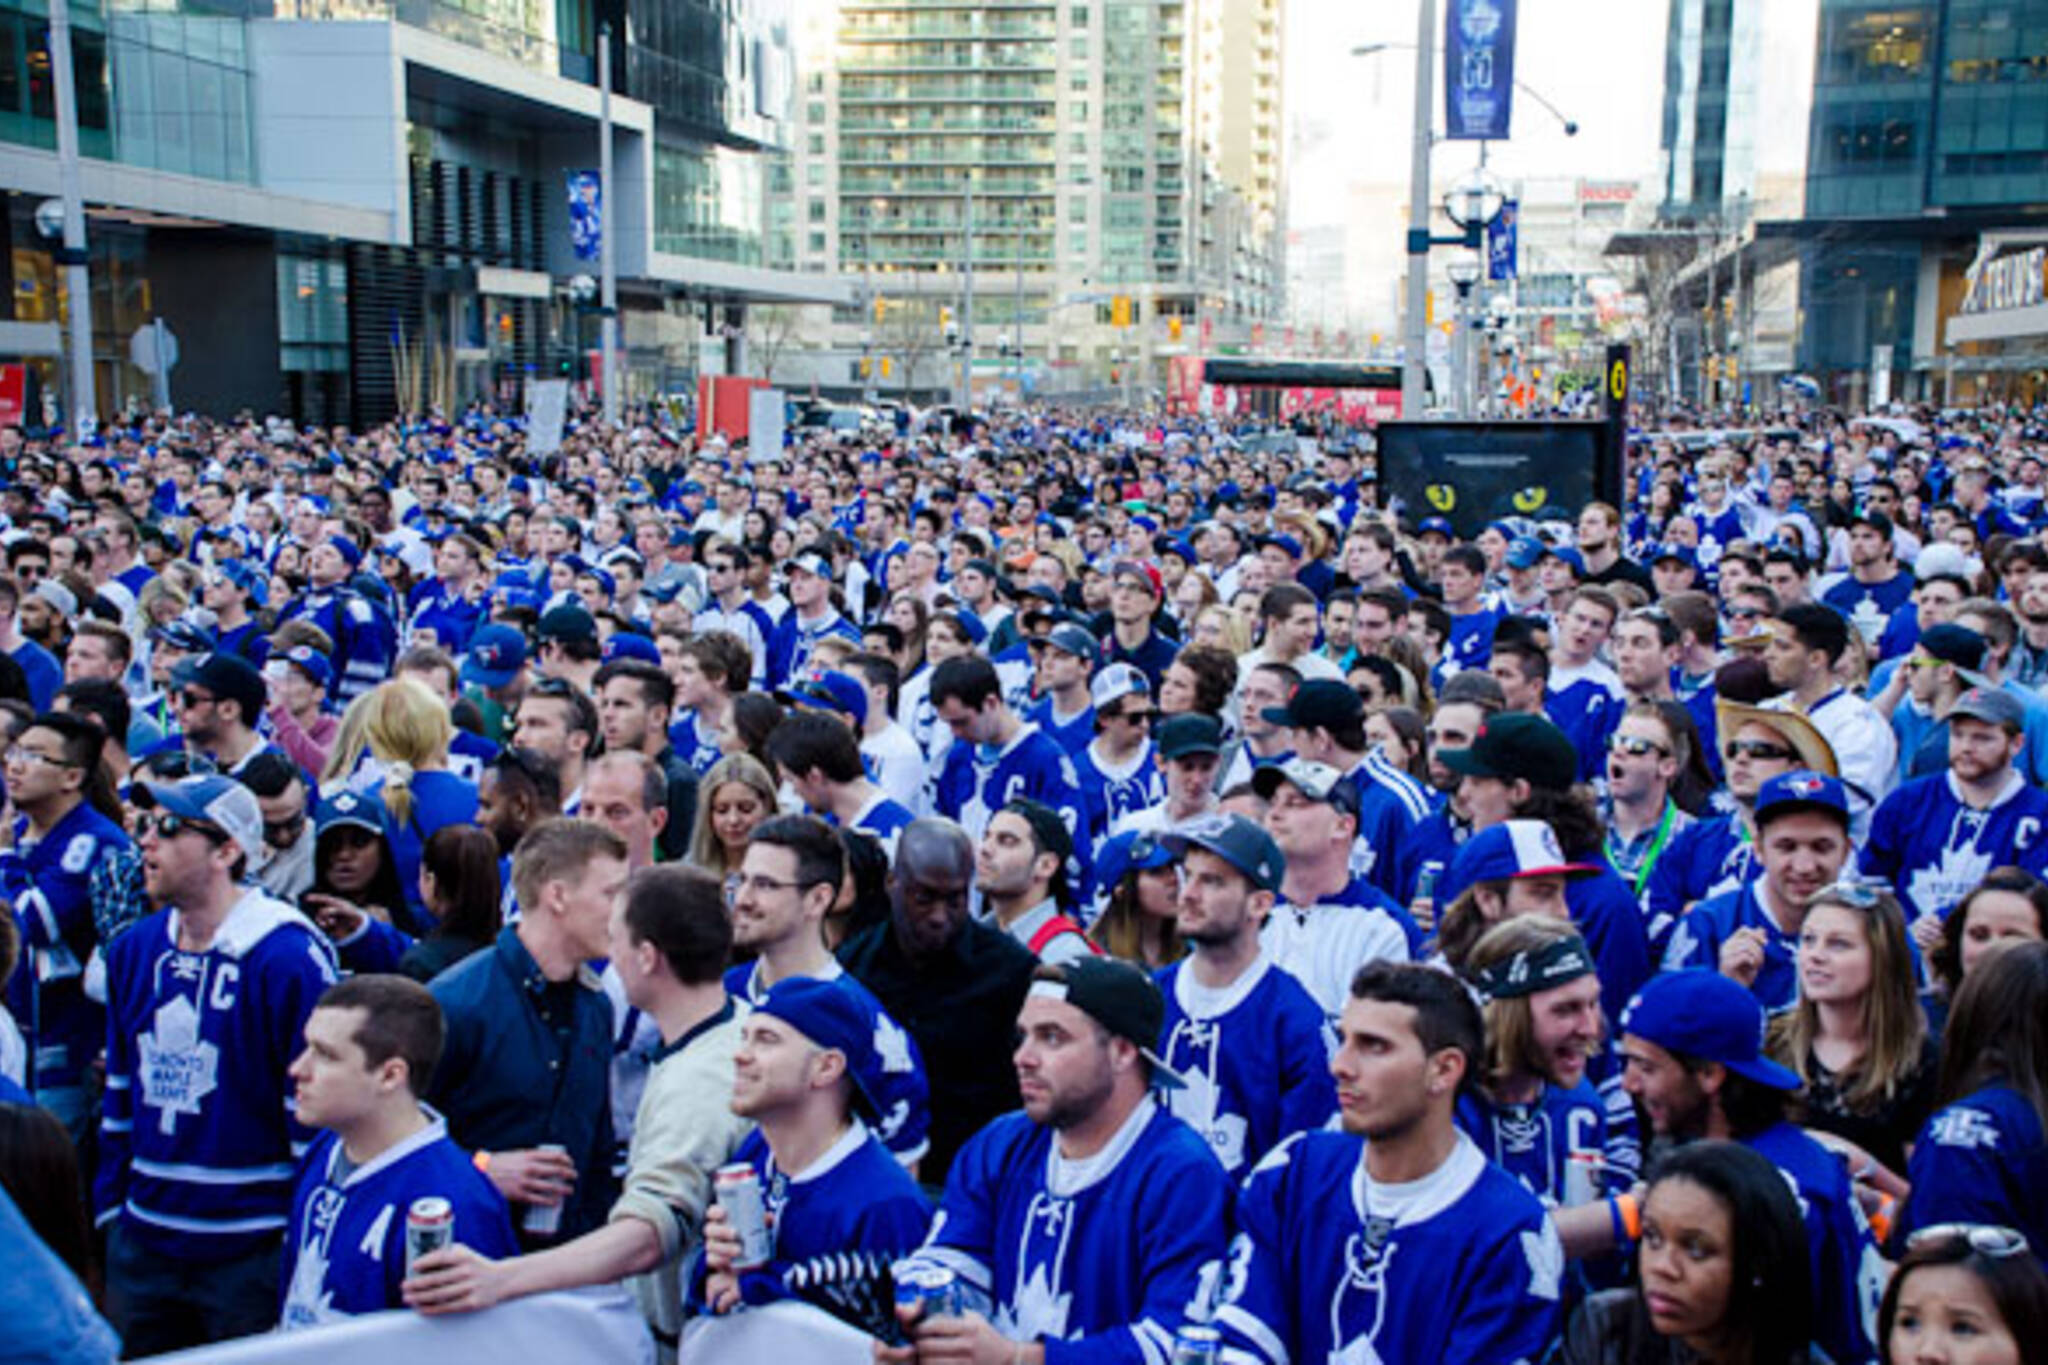 Who are Toronto Maple Leafs fans?